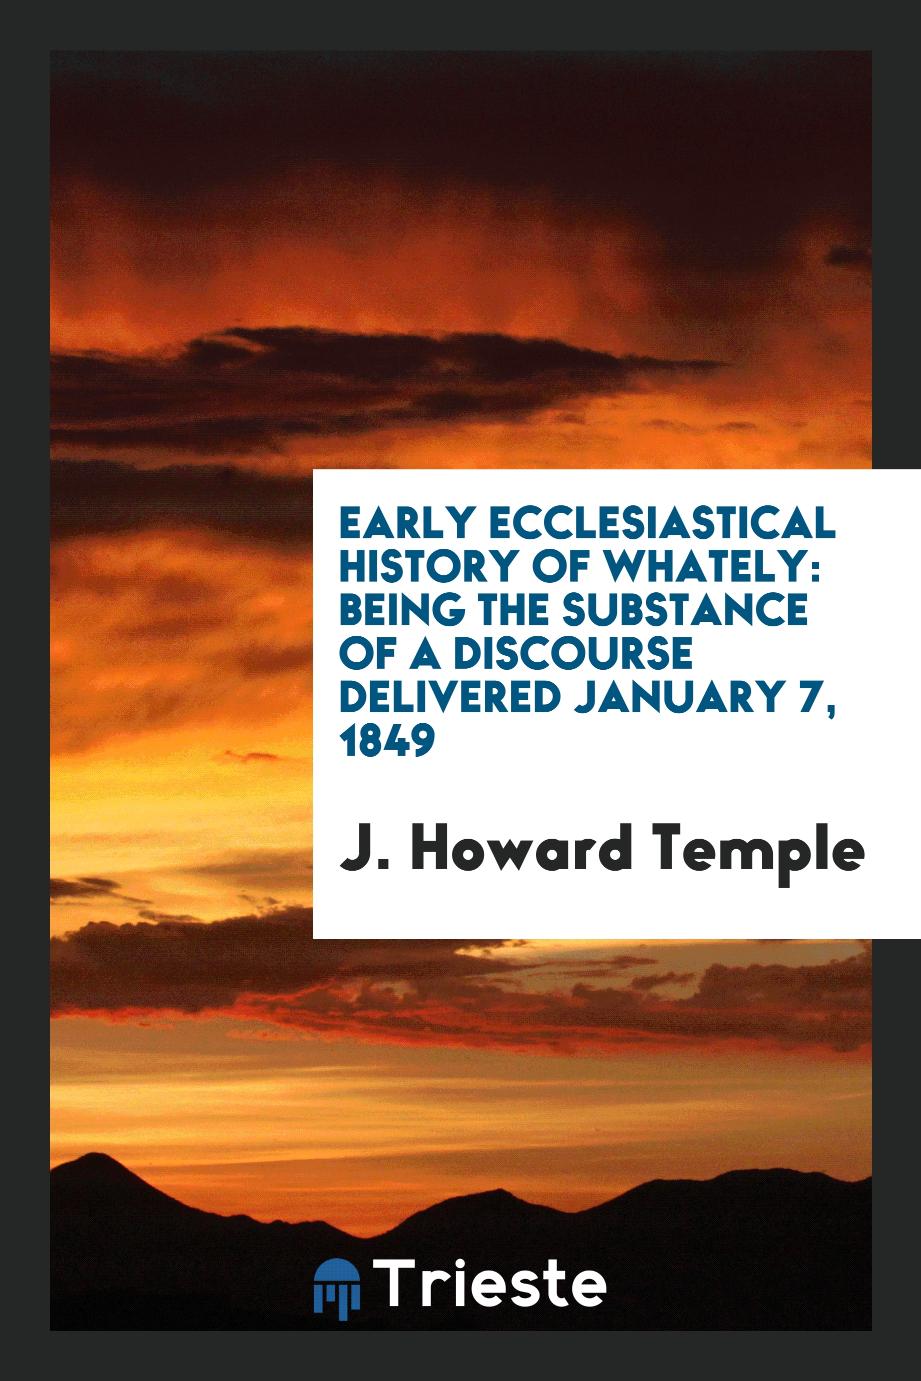 Early Ecclesiastical History of Whately: Being the Substance of a Discourse Delivered January 7, 1849